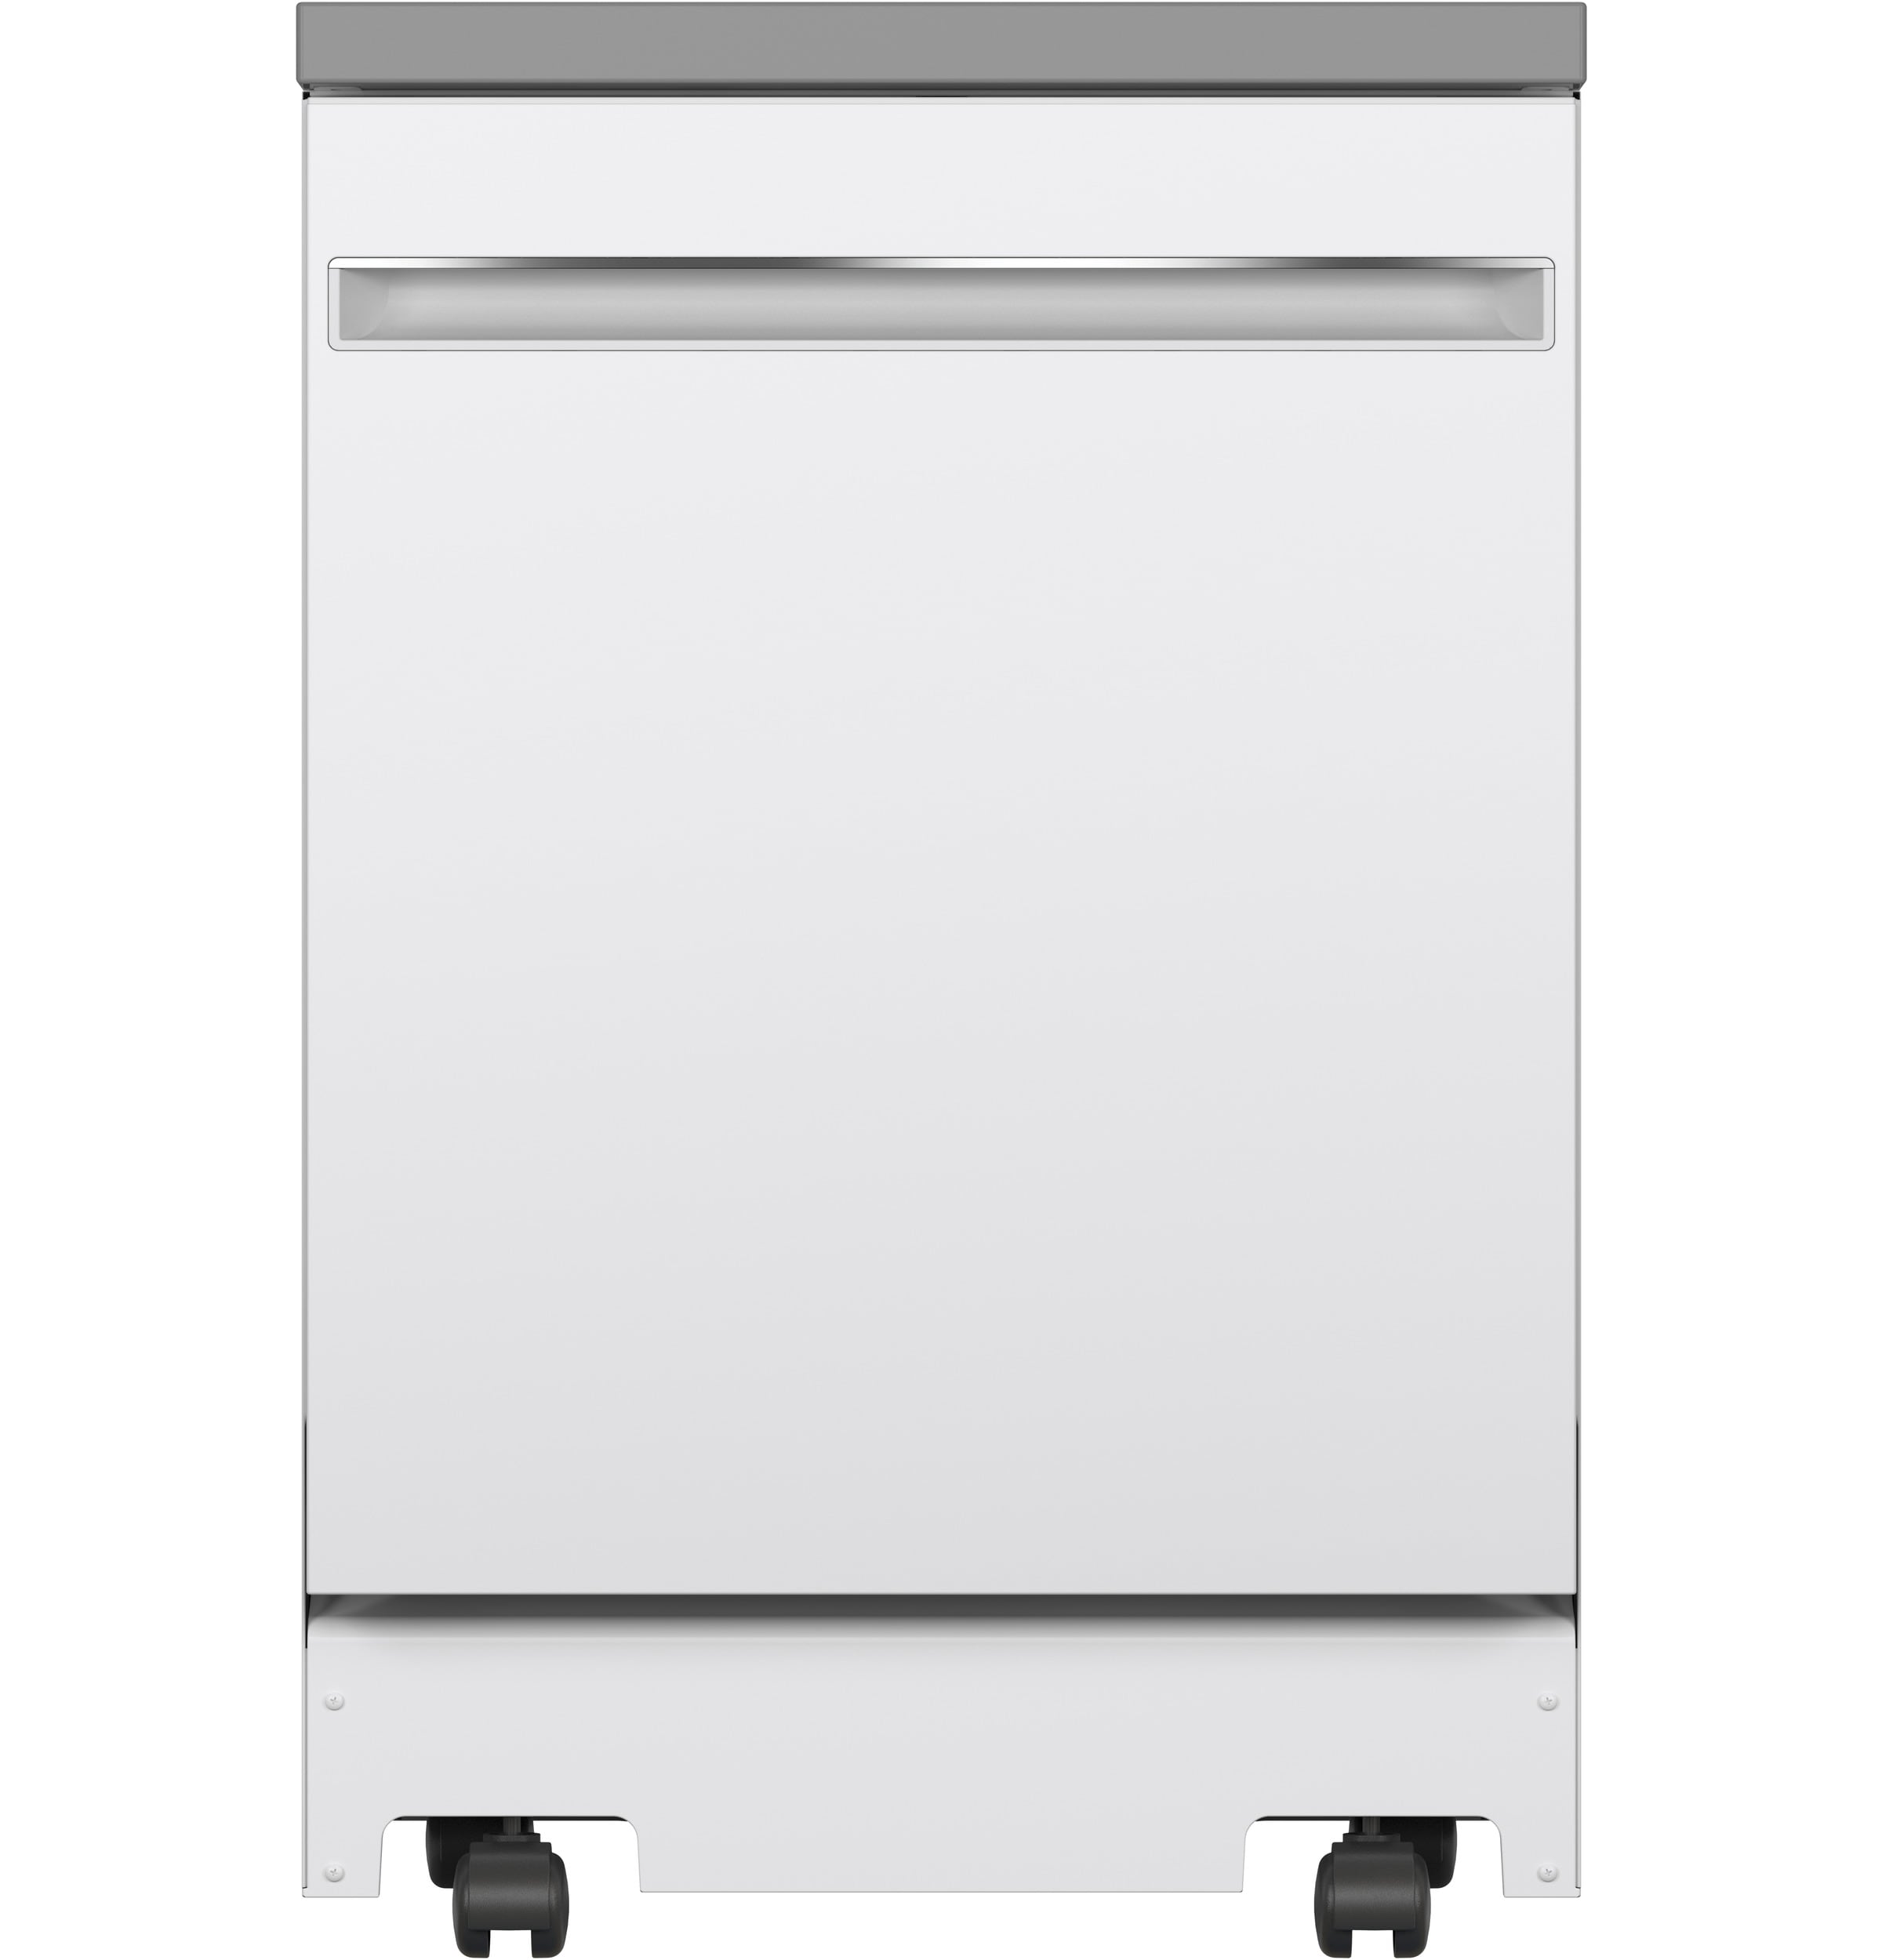 Farberware Professional 16.5-in Portable Countertop Dishwasher (White)  ENERGY STAR, 62-dBA in the Portable Dishwashers department at